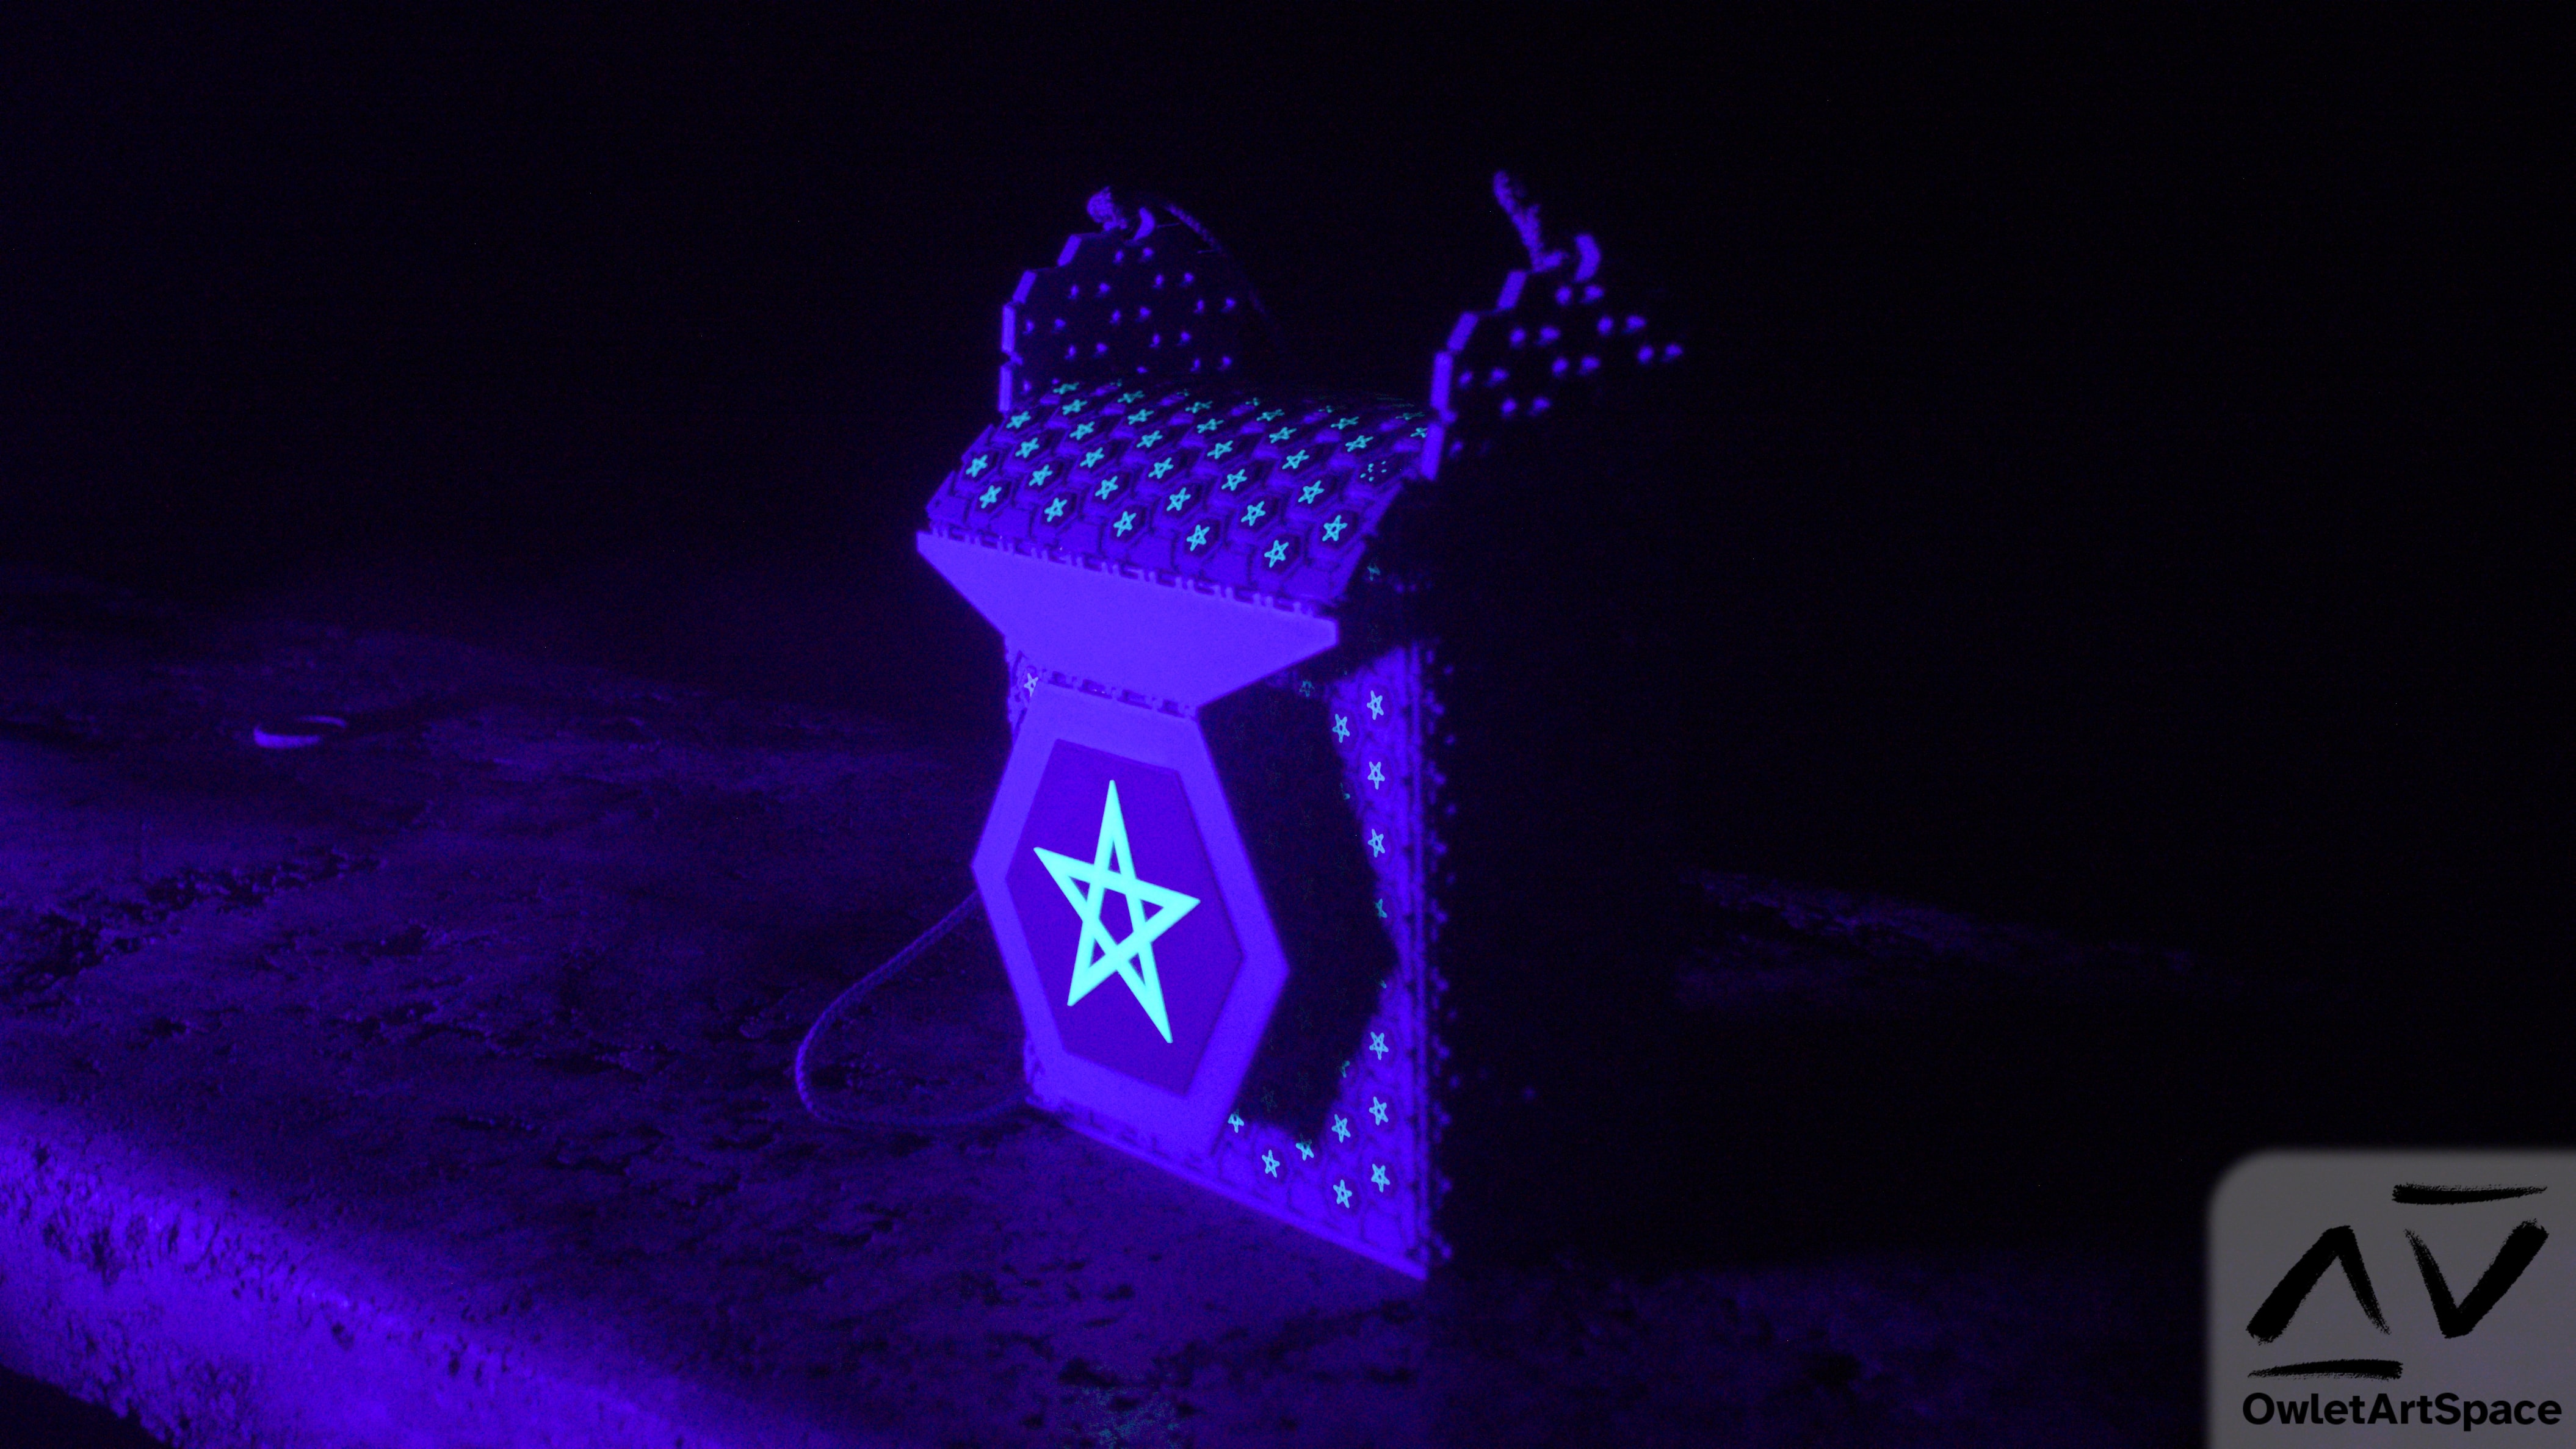 The starry bag under UV lighting. The stars have a fluorescent glow.